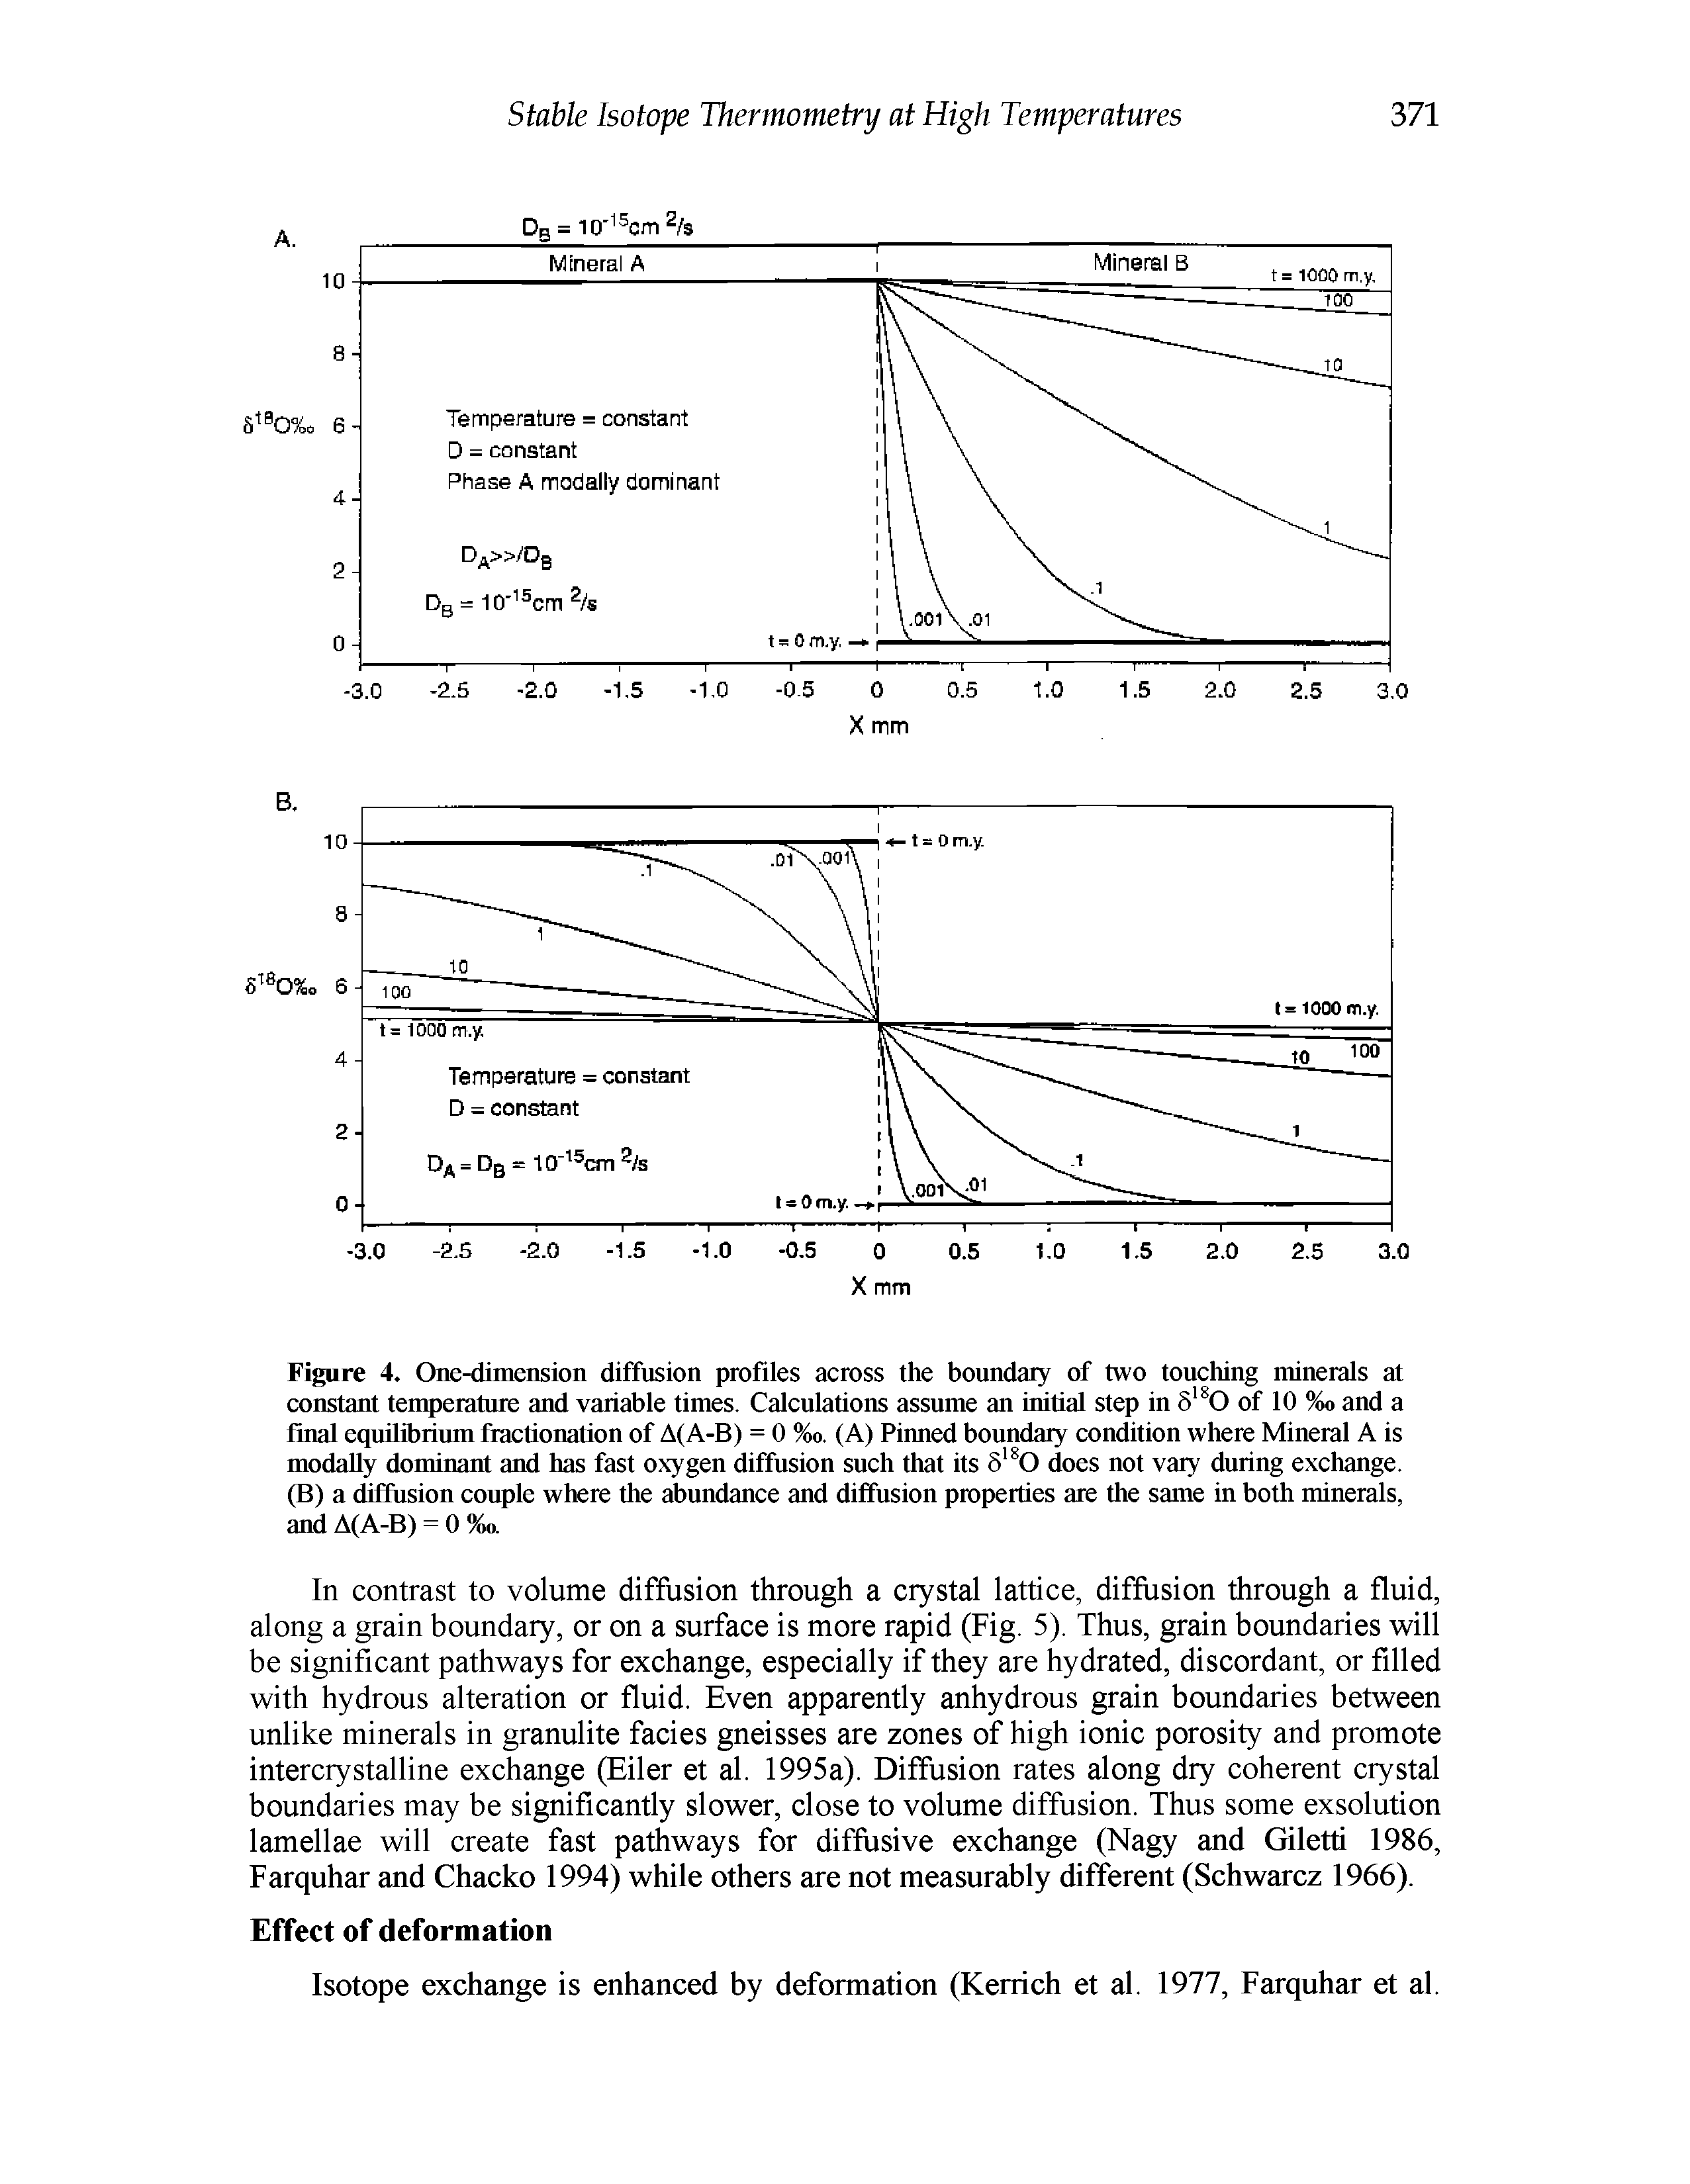 Figure 4. One-dimension diffusion profdes across the boundary of two touching minerals at constant temperature and variable times. Calculations assume an initial step in 5 0 of 10 %o and a final equilibrium fractionation of A(A-B) = 0 %o. (A) Firmed boundary condition where Mineral A is modally dominant and has fast oxygen diffusion such that its 5 0 does not vary during exchange.